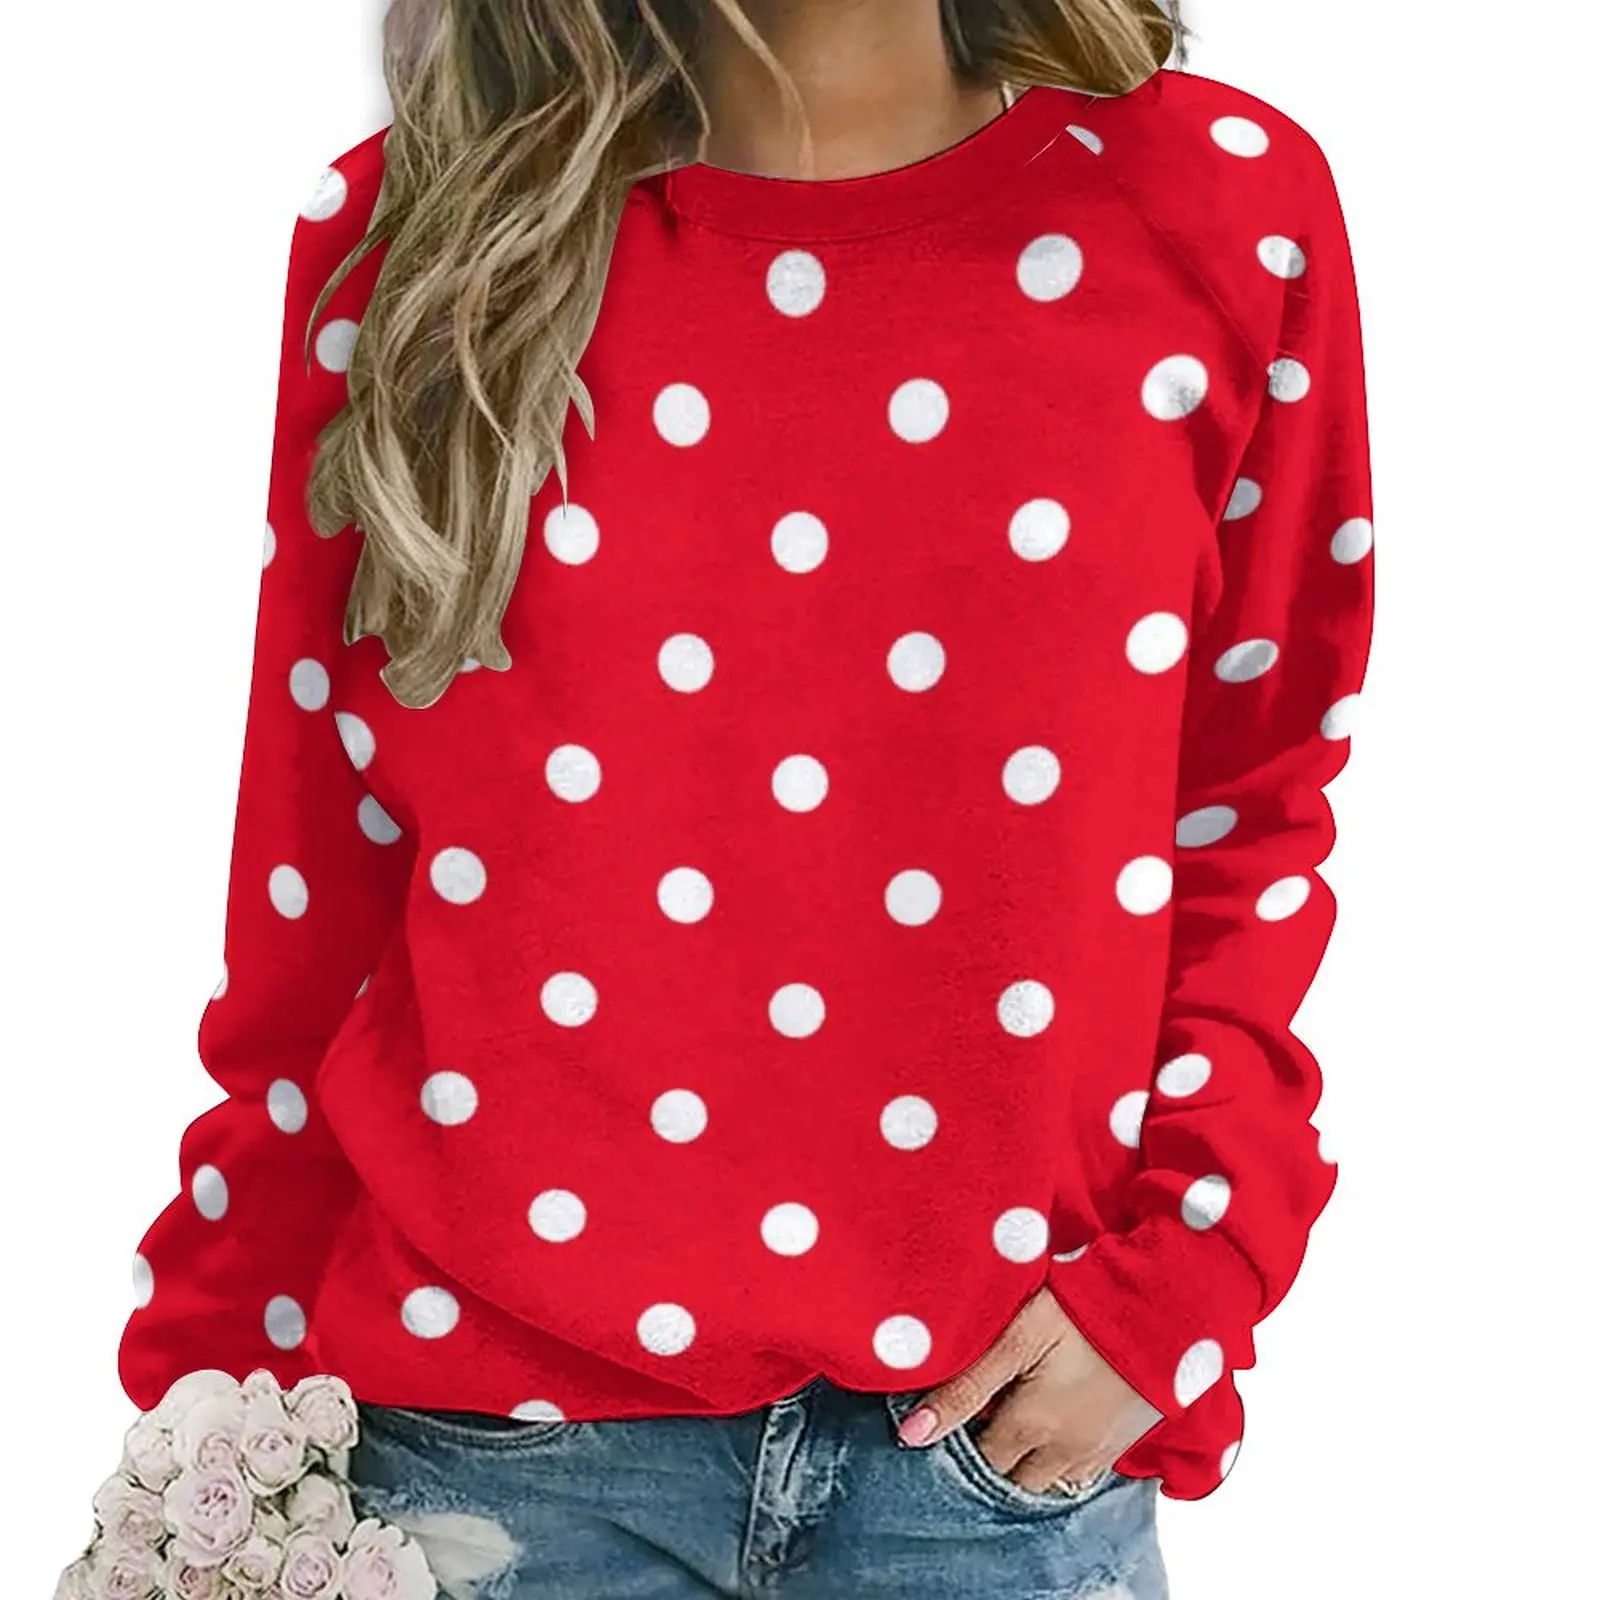 

Red with White Polka Dots Casual Hoodies Female Polka Dot Spotted Circles Funny Hoodie Long Sleeve Hip Hop Oversize Sweatshirts